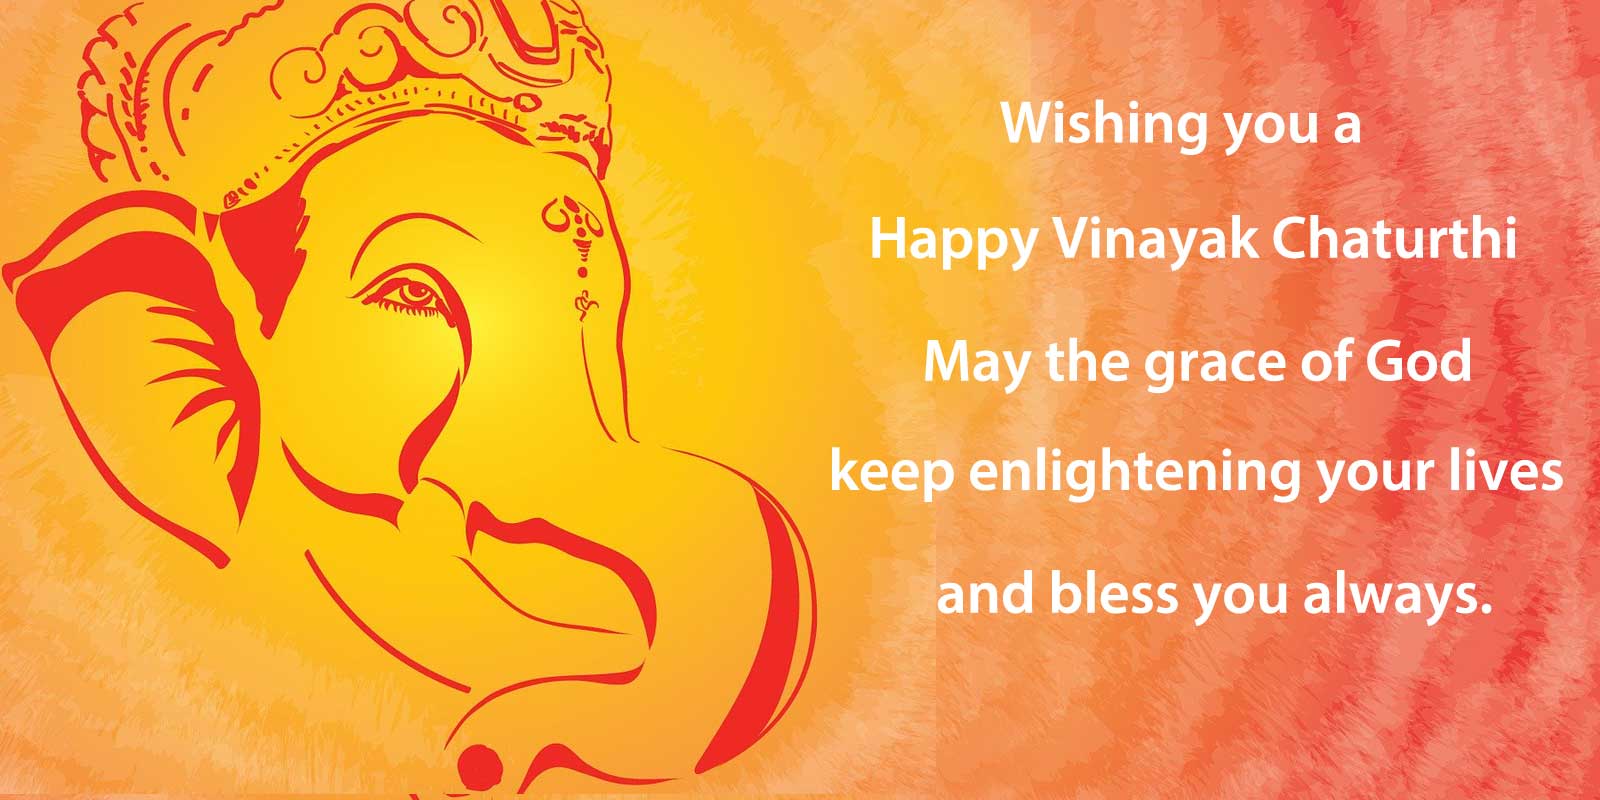 Happy Ganesh Chaturthi Wishes and Quotes - Well Quo